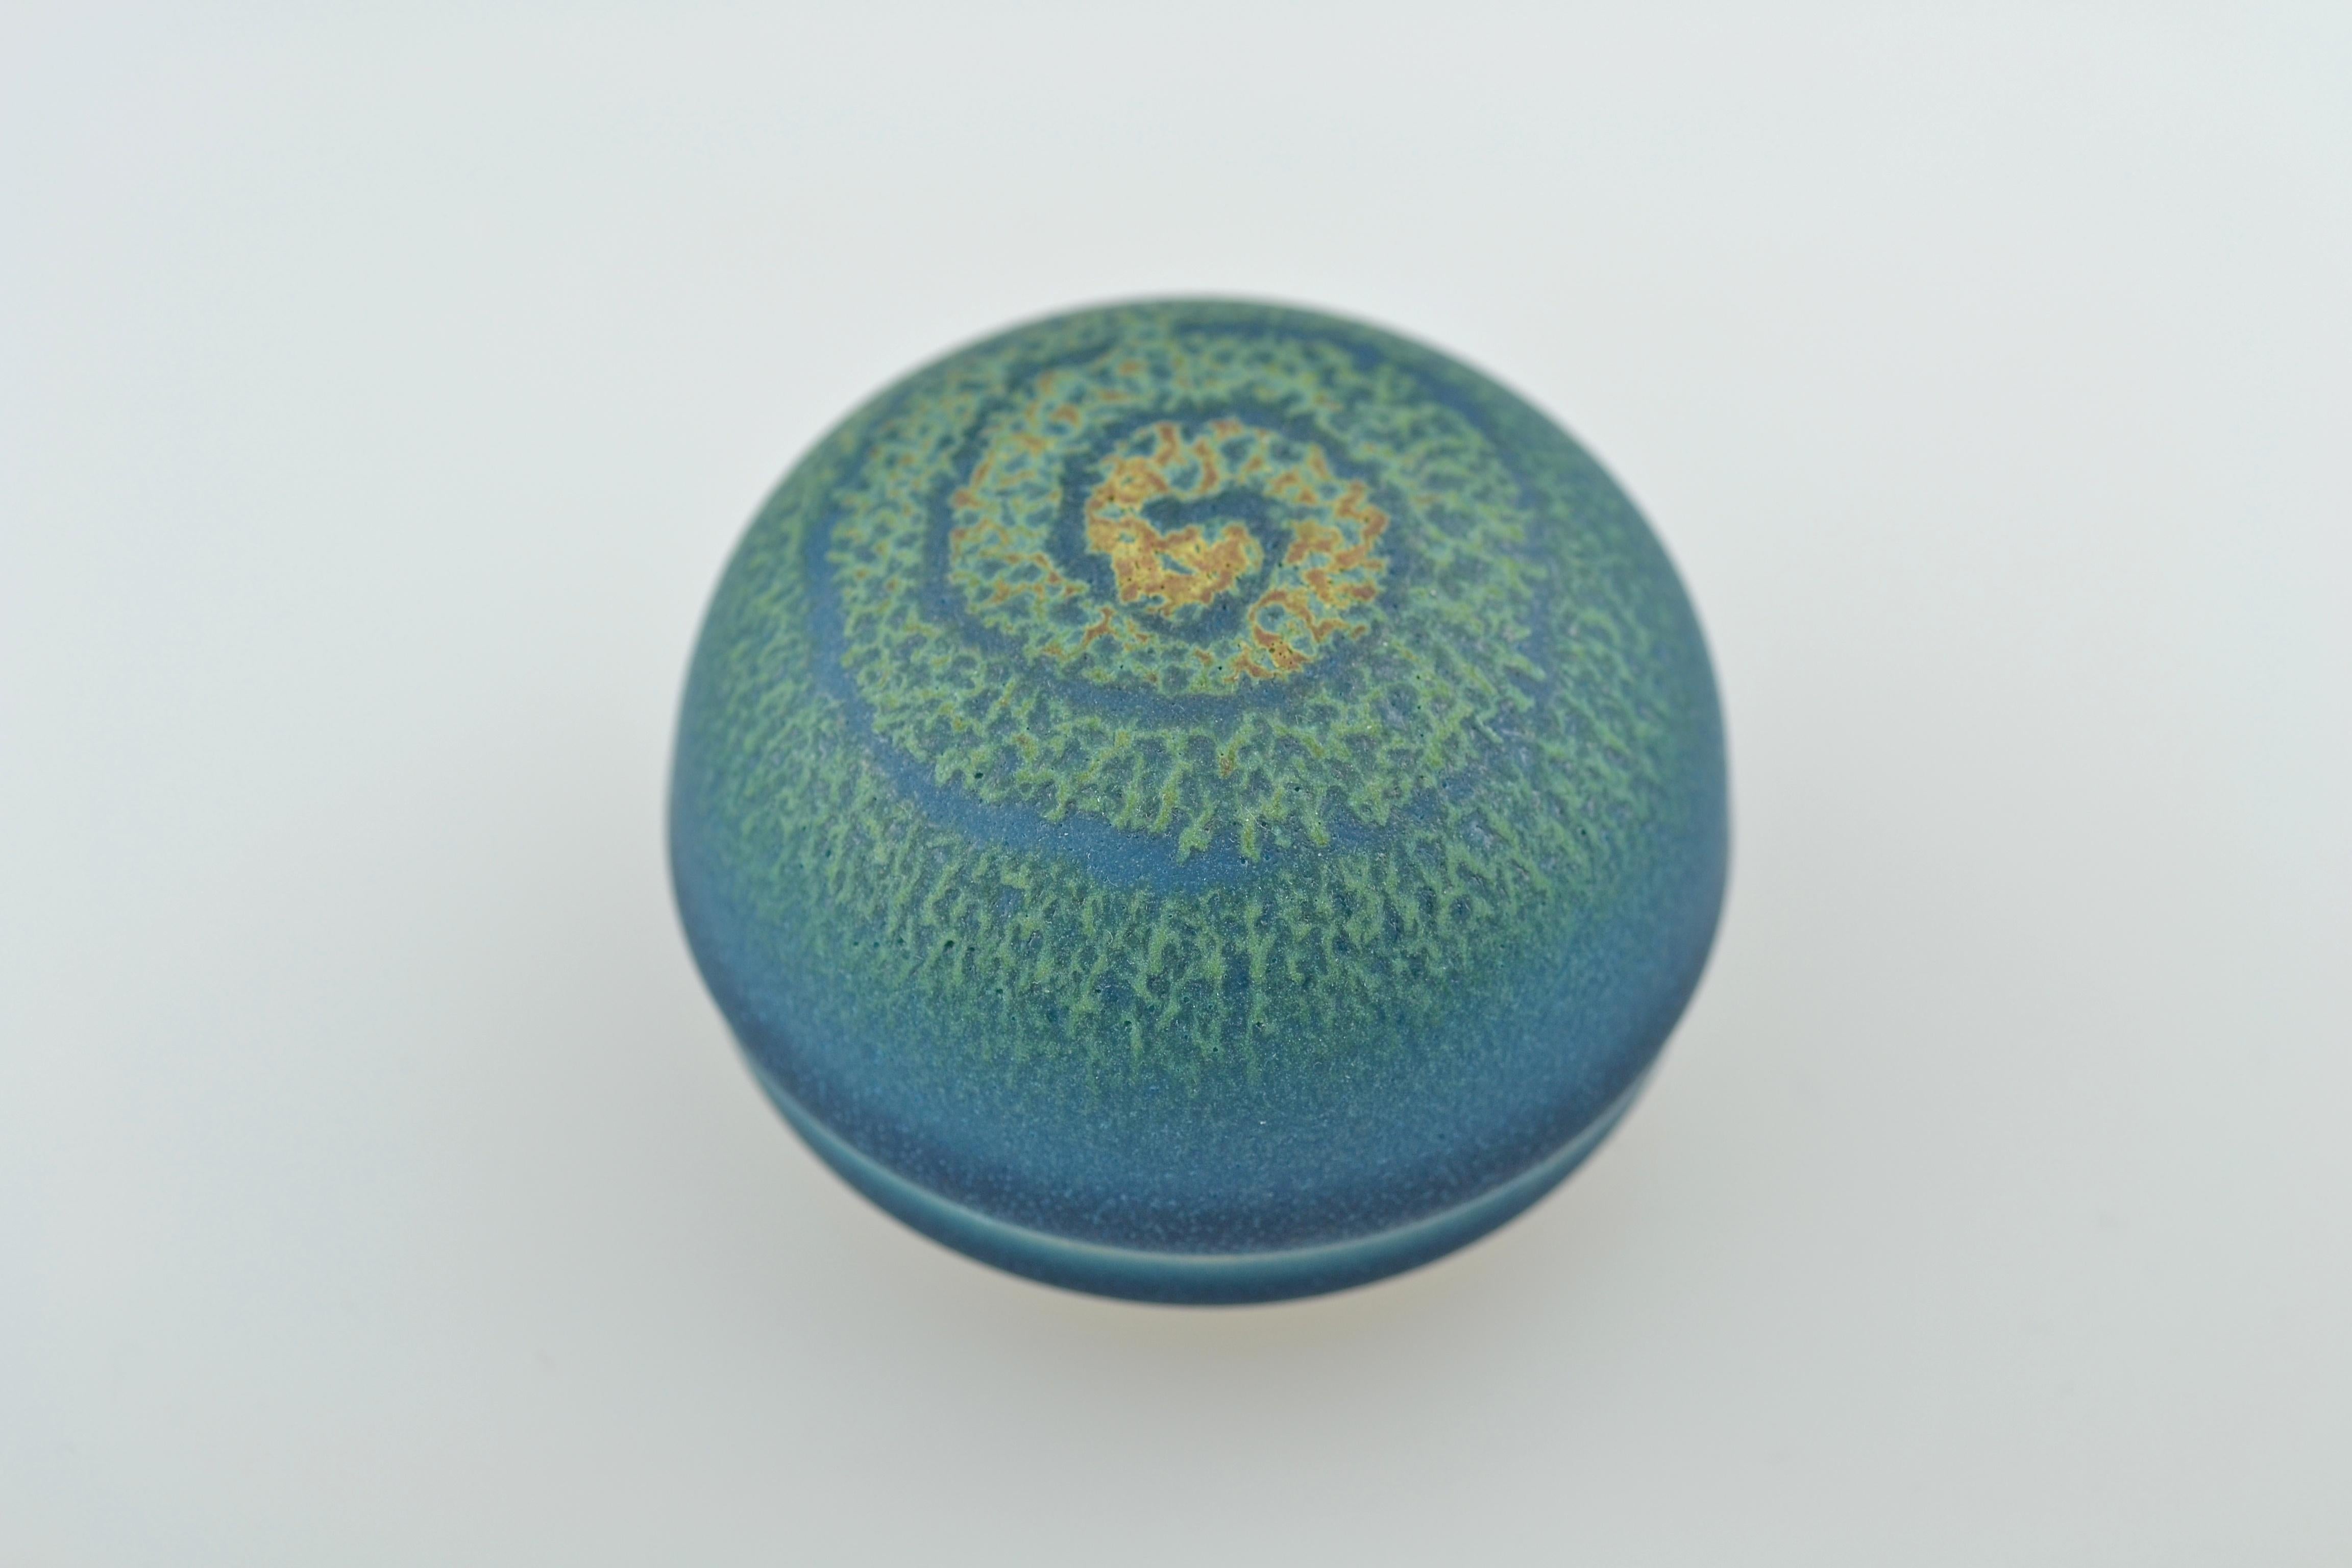 The small ceramic case with a dome-shaped lid resting on a small circular stand is for storing incense (kôgô). Beautiful kôgô are used for representational purposes within the tea ceremony, after the incense is placed in the charcoal brazier during